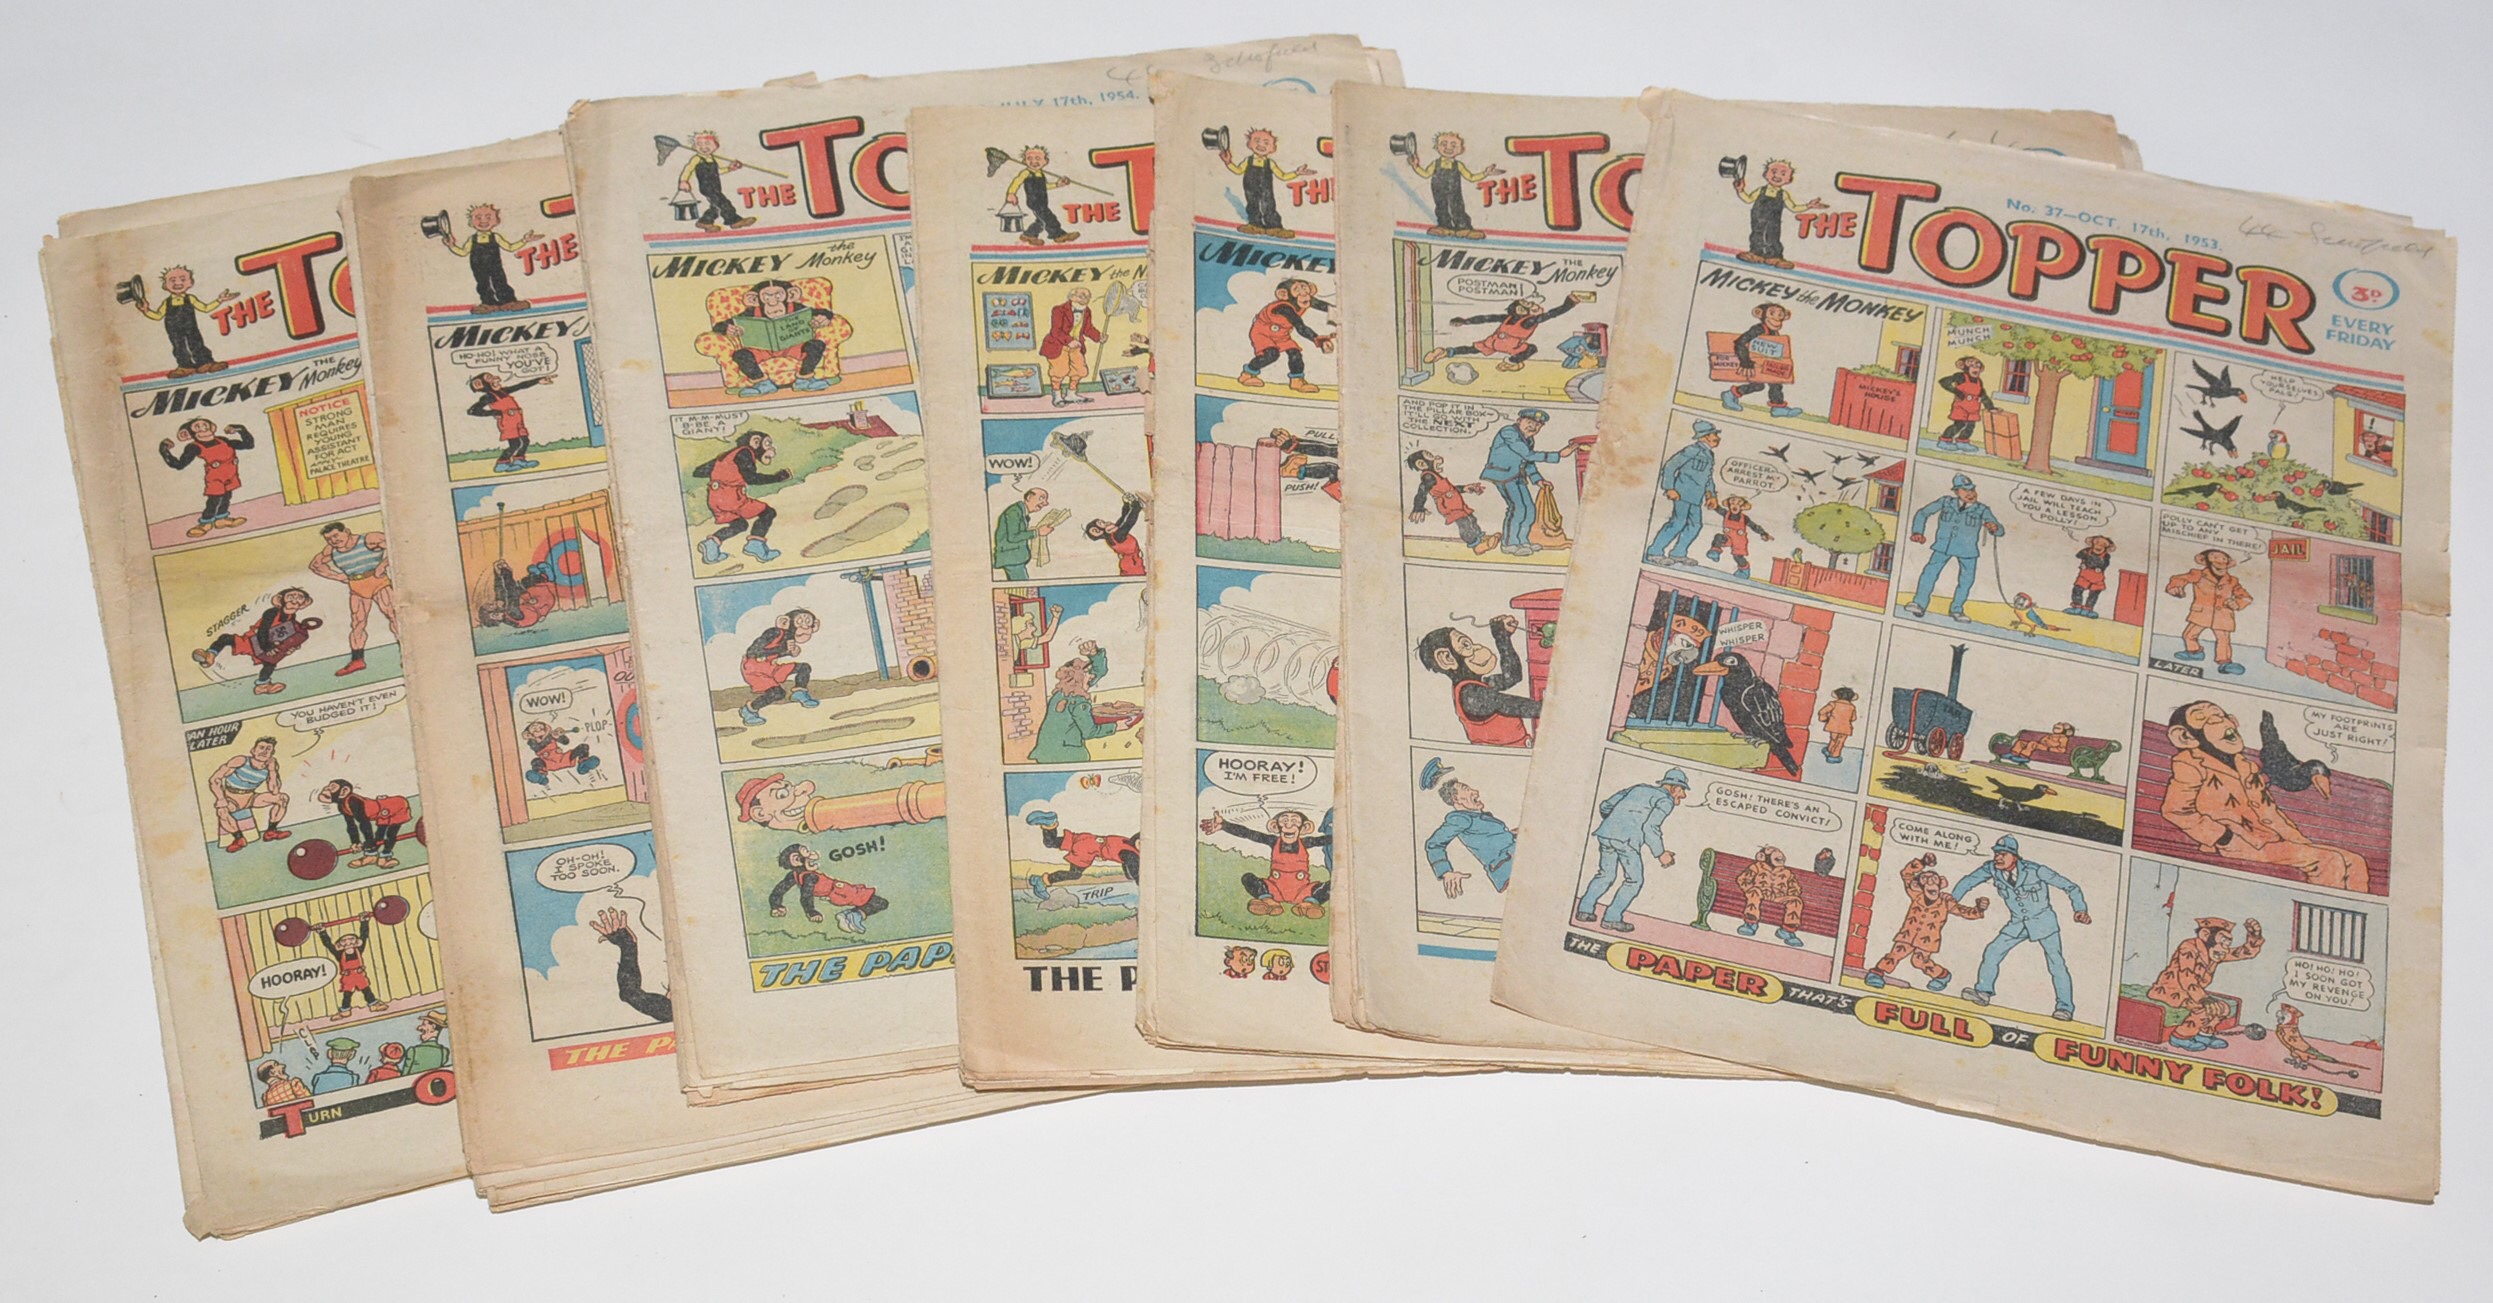 The Topper, 24 miscellaneous issues (earliest No. 37 October 17th, 1953 to highest No. 98 December 18th, 1954)